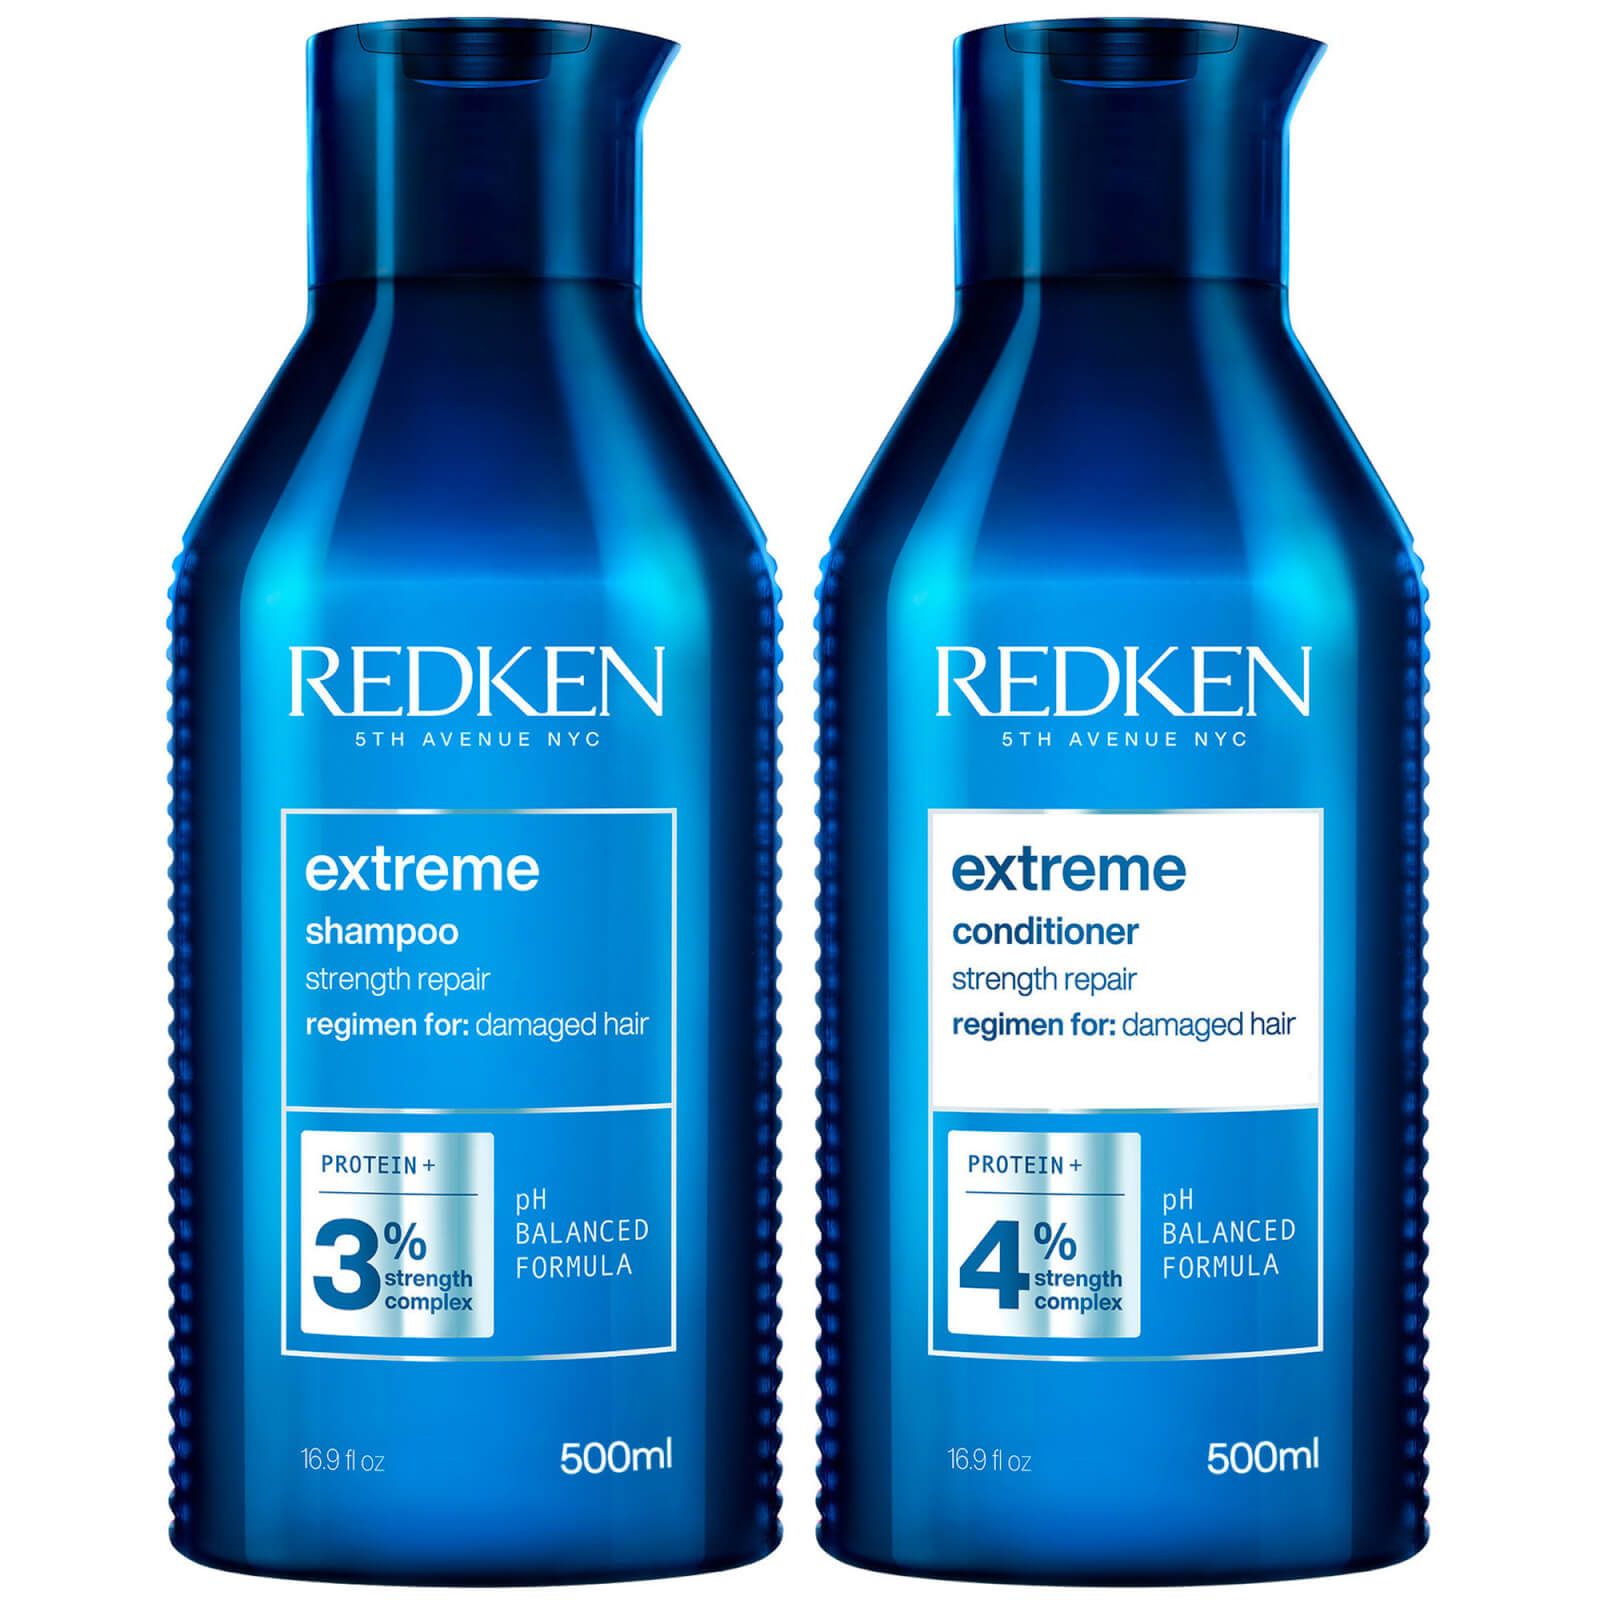 Photos - Hair Product Redken Extreme Shampoo and Conditioner Routine for Damaged Hair 500ml RCBS 